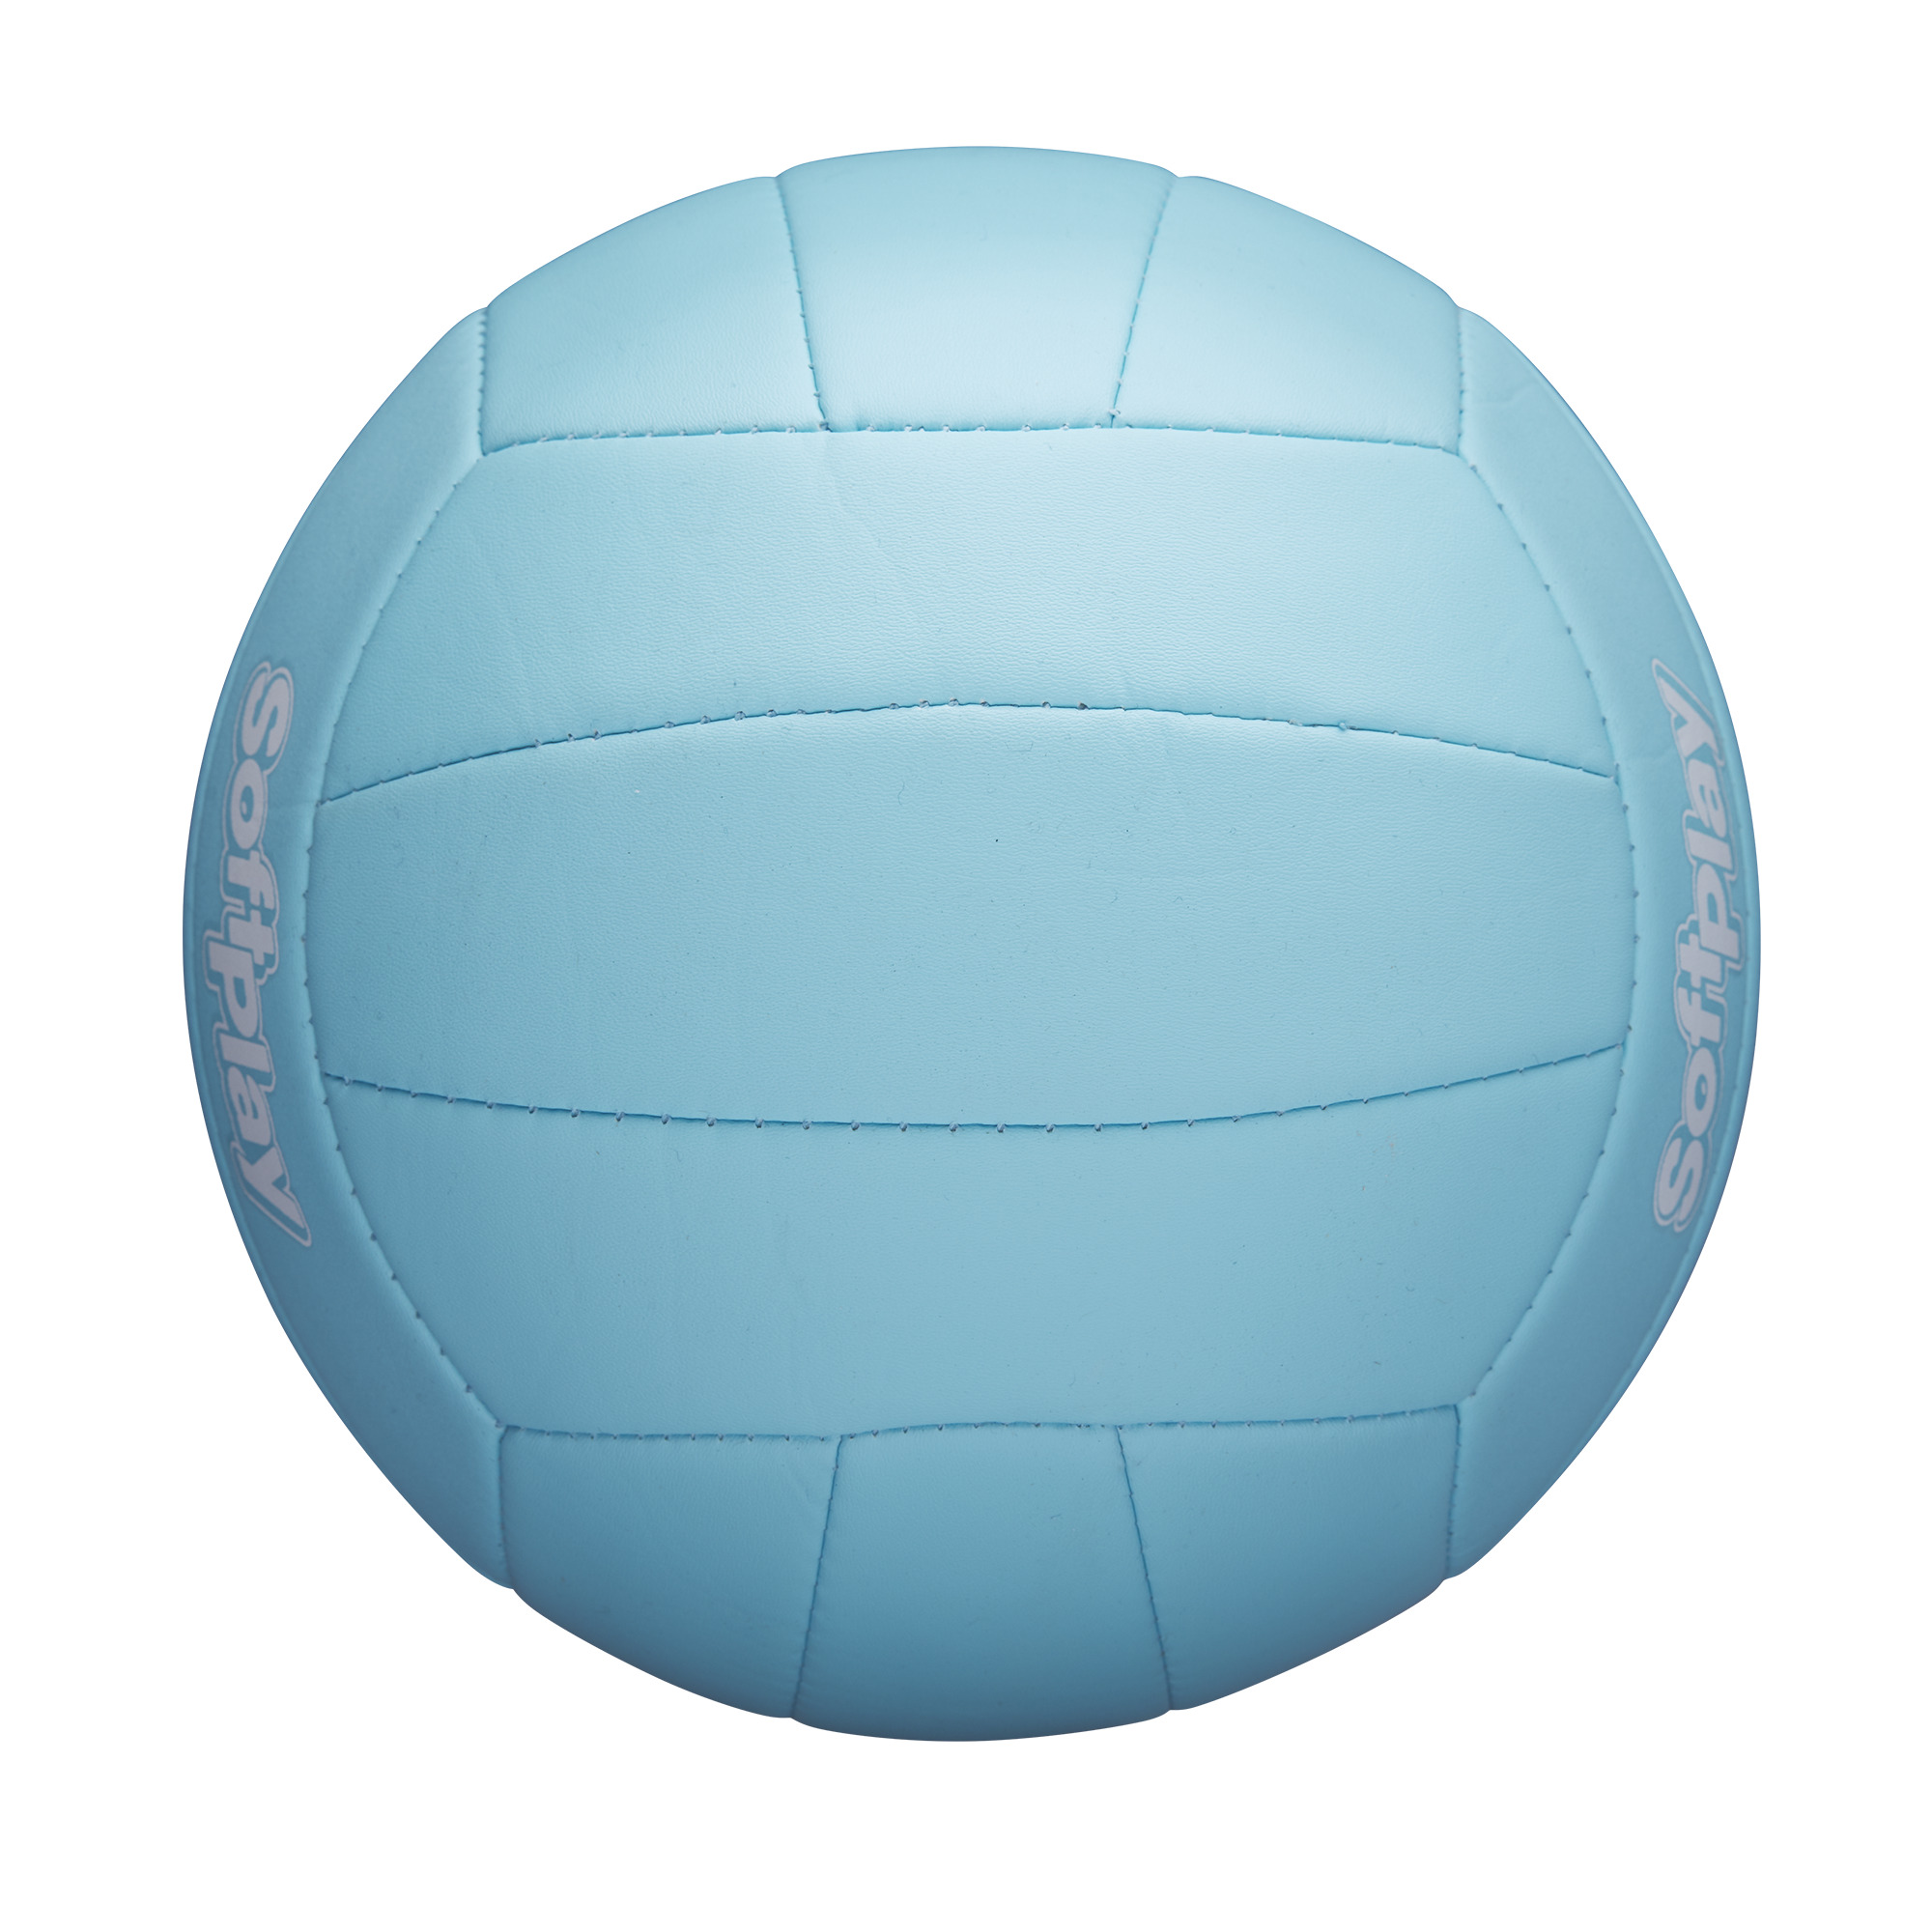 Wilson Soft Play Outdoor Volleyball, Official Size, Blue - image 4 of 7